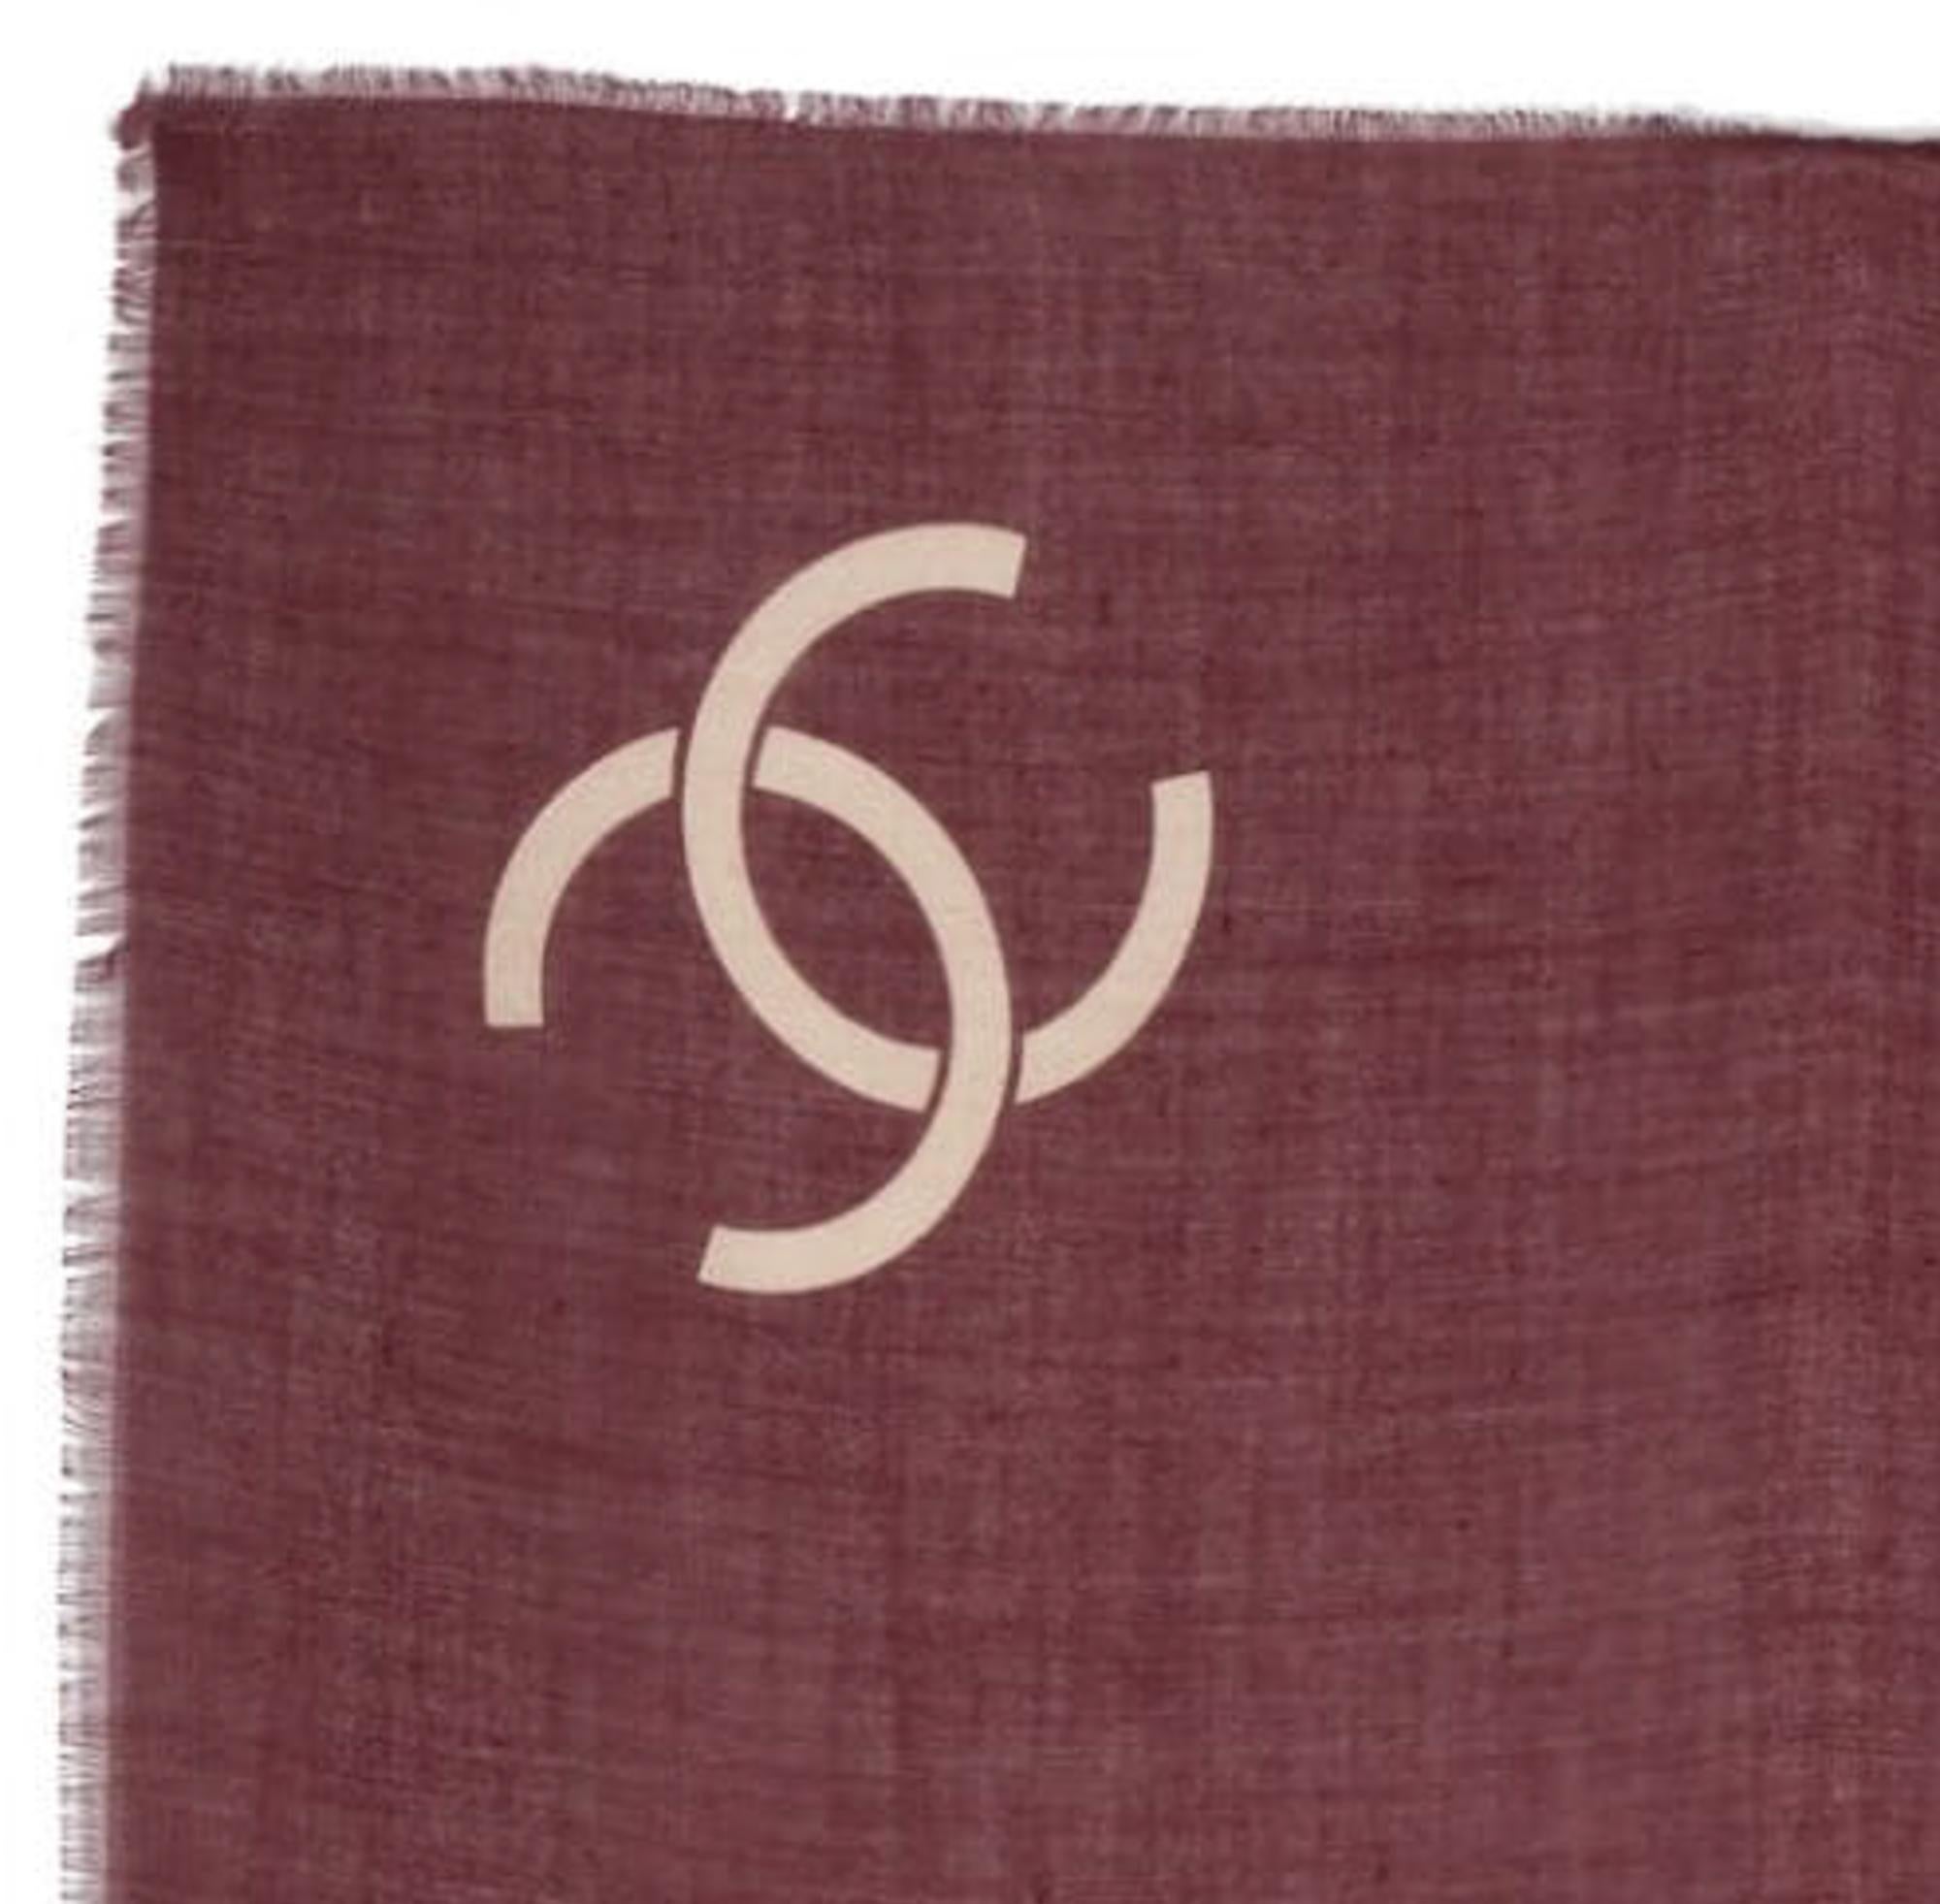 Chanel bordeaux cashmere scarf featuring a camel iconic CC printed on, fringed edges and a top logo signature.
Circa 2000s
Composition: 48% cachemire 52% silk. 
In good vintage condition. Made in France.
34.6in. (88 cm) X 34.6in. (88 cm)
We